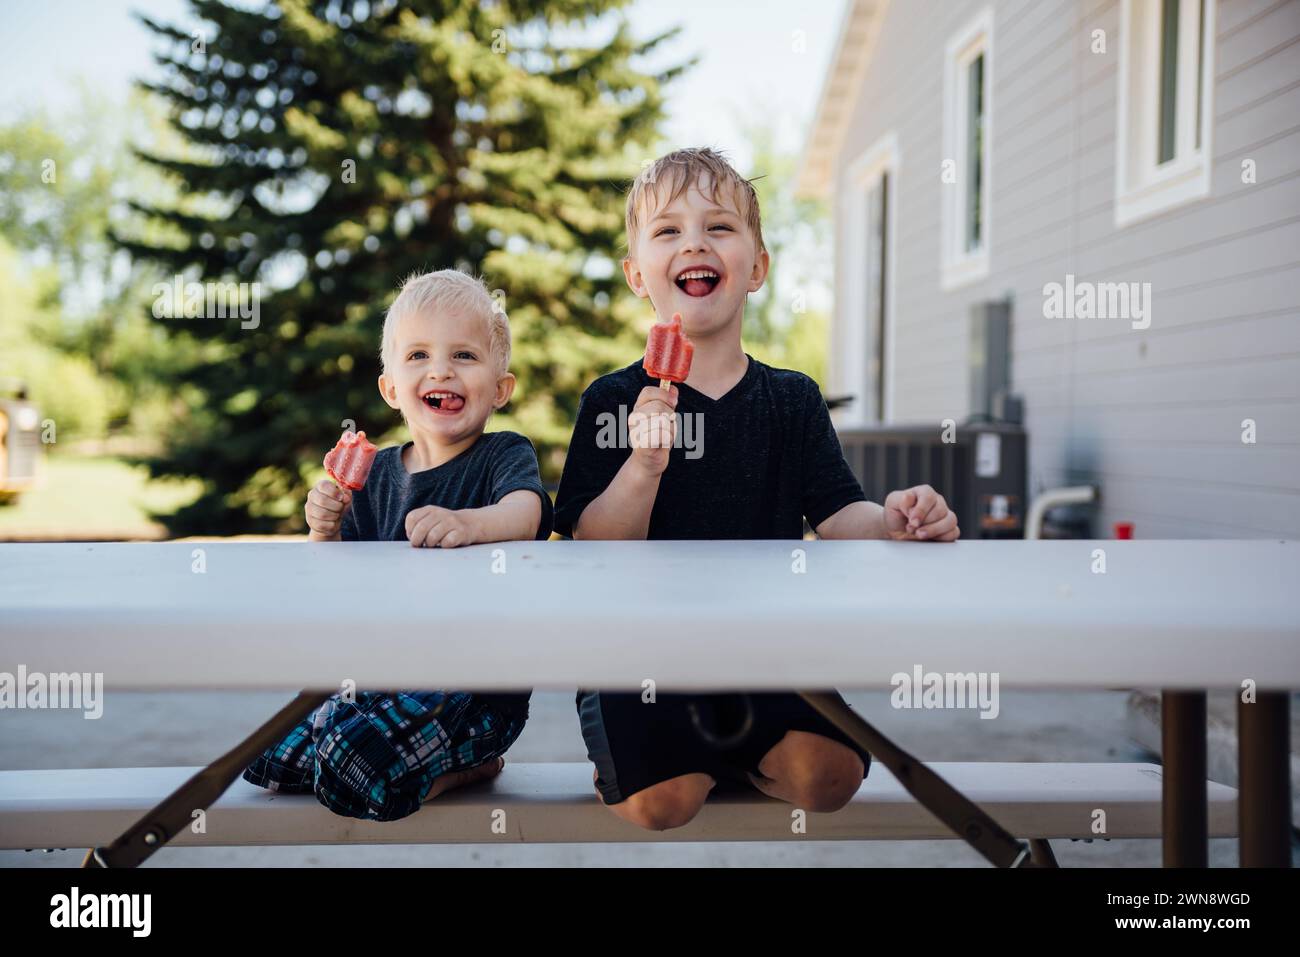 Two boys sitting on picnic table making silly faces with popsicles. Stock Photo